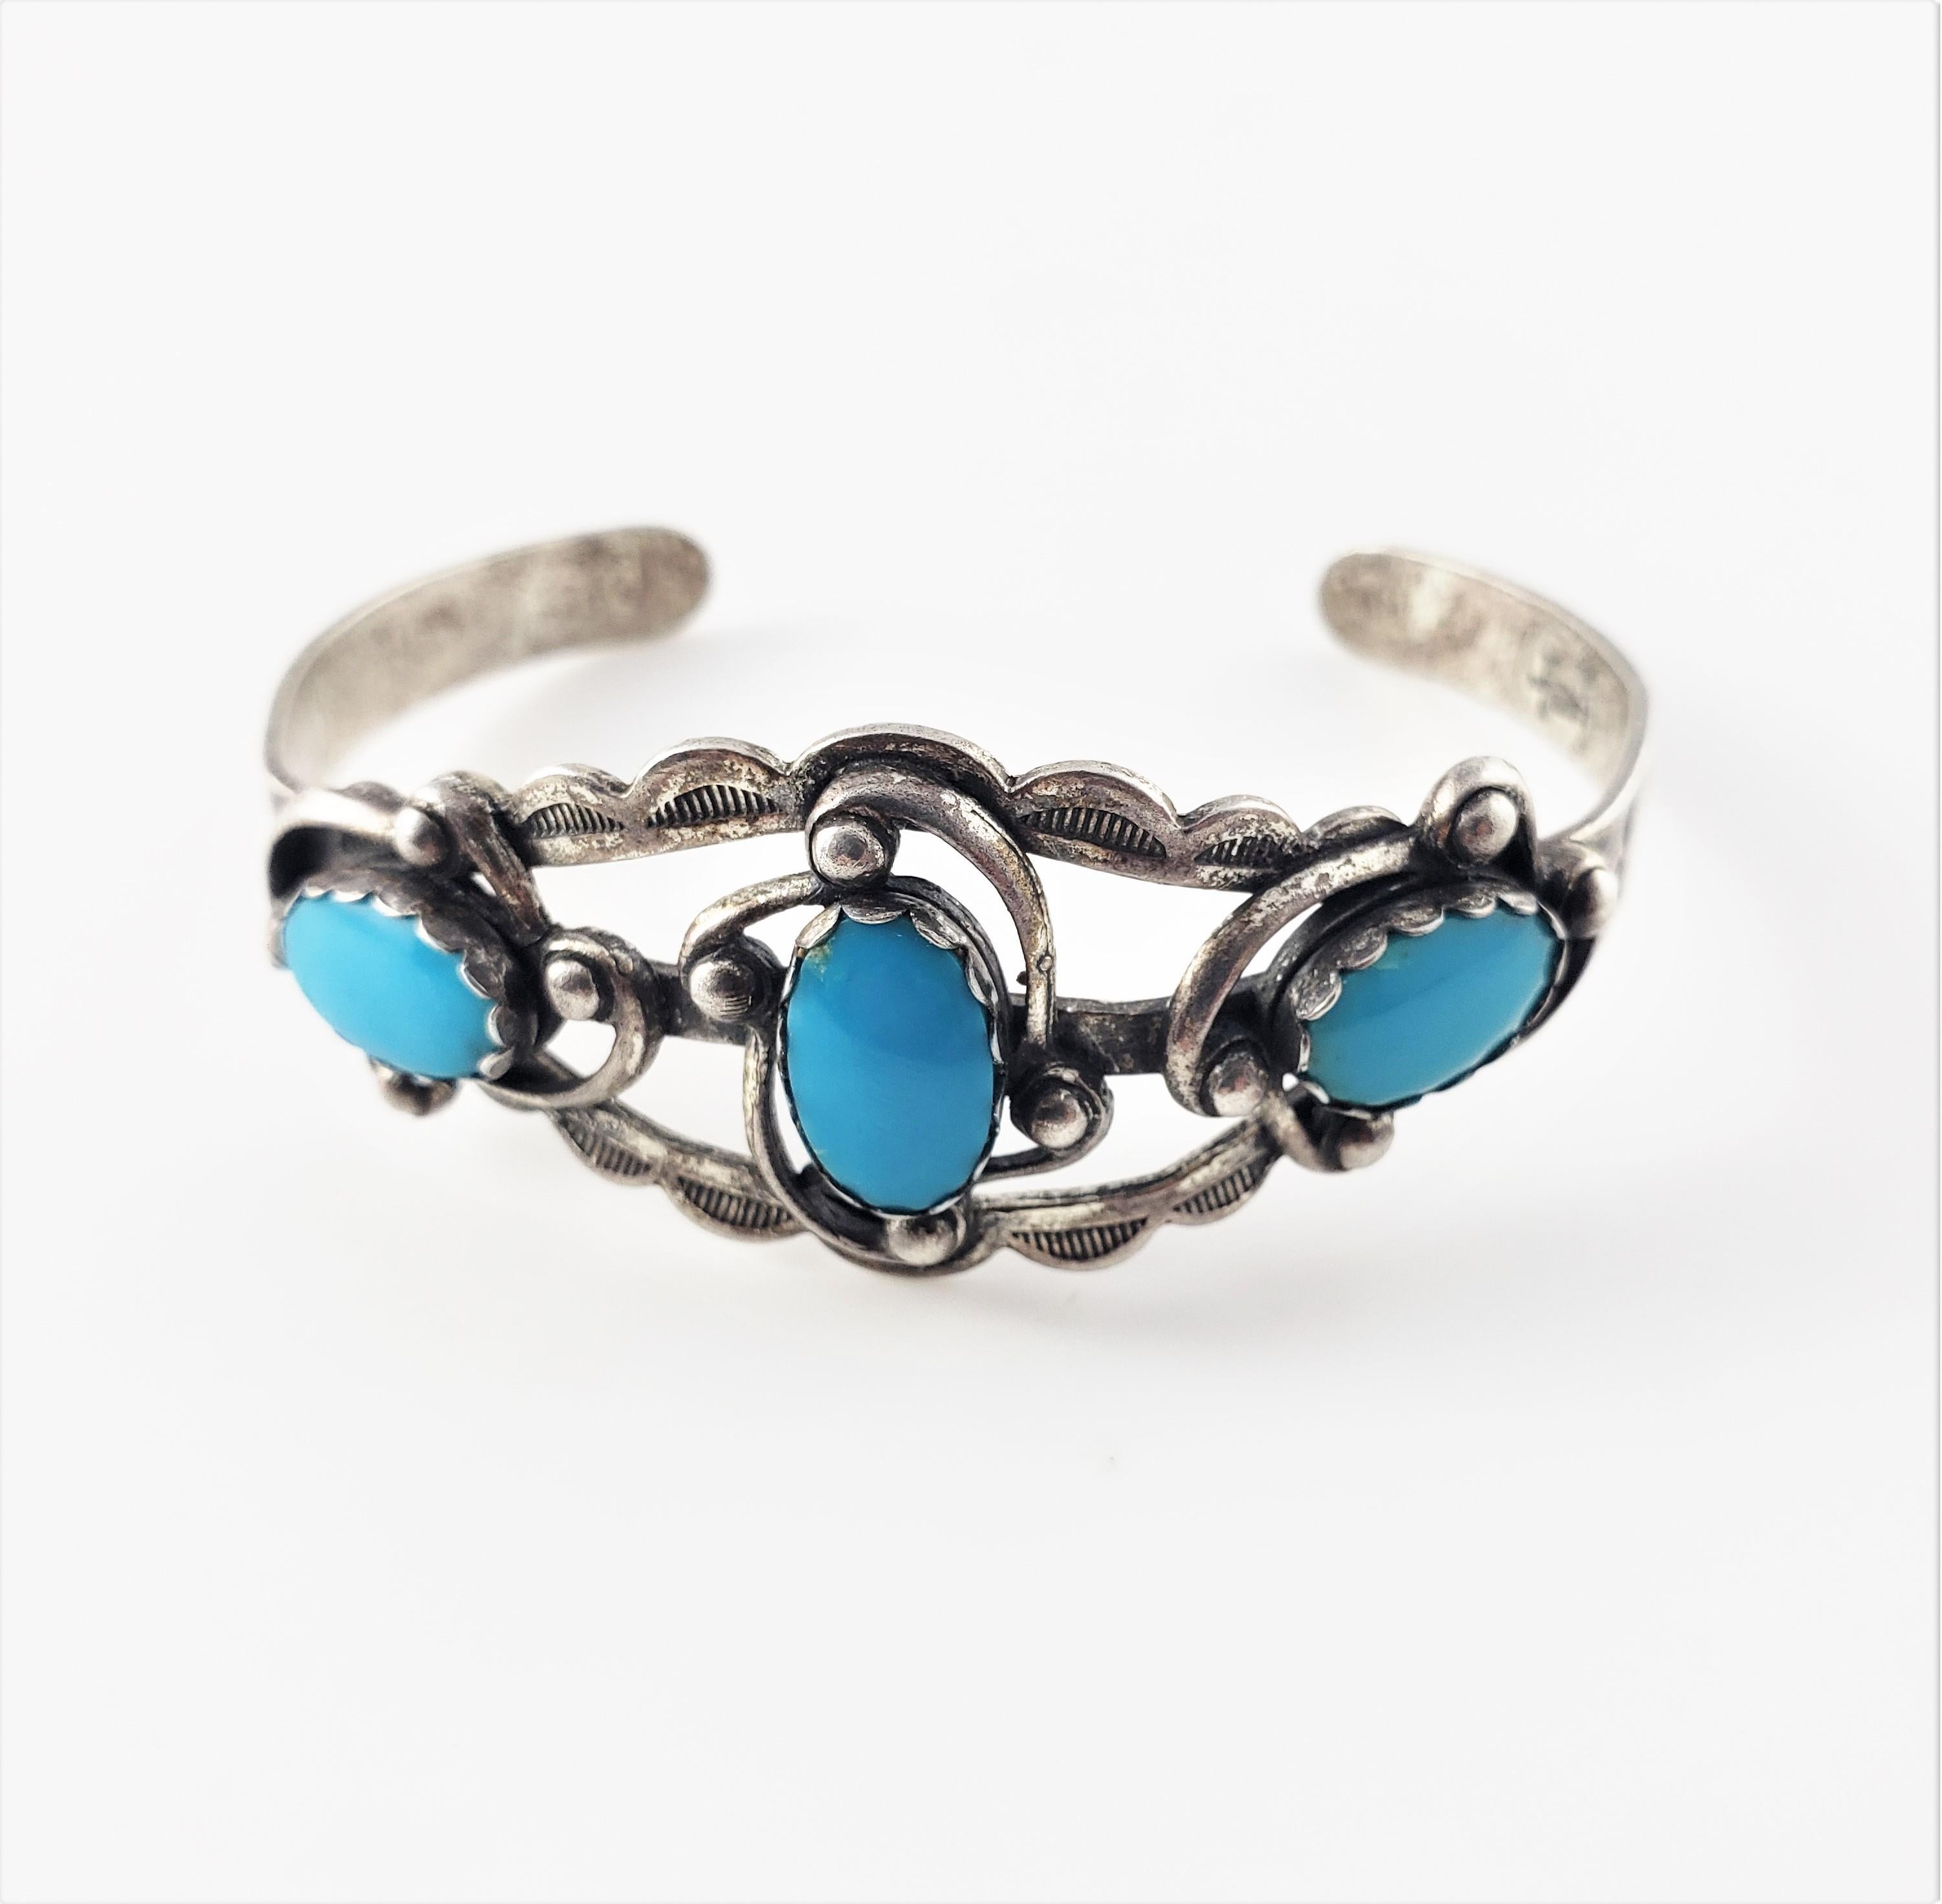 Vintage Native American Sterling Silver Turquoise Cuff Bracelet-

This lovely Native American cuff bracelet features three oval turquoise stones (12 mm x 8 mm x 5 mm each) set in beautifully detailed sterling silver. Width: 0.9